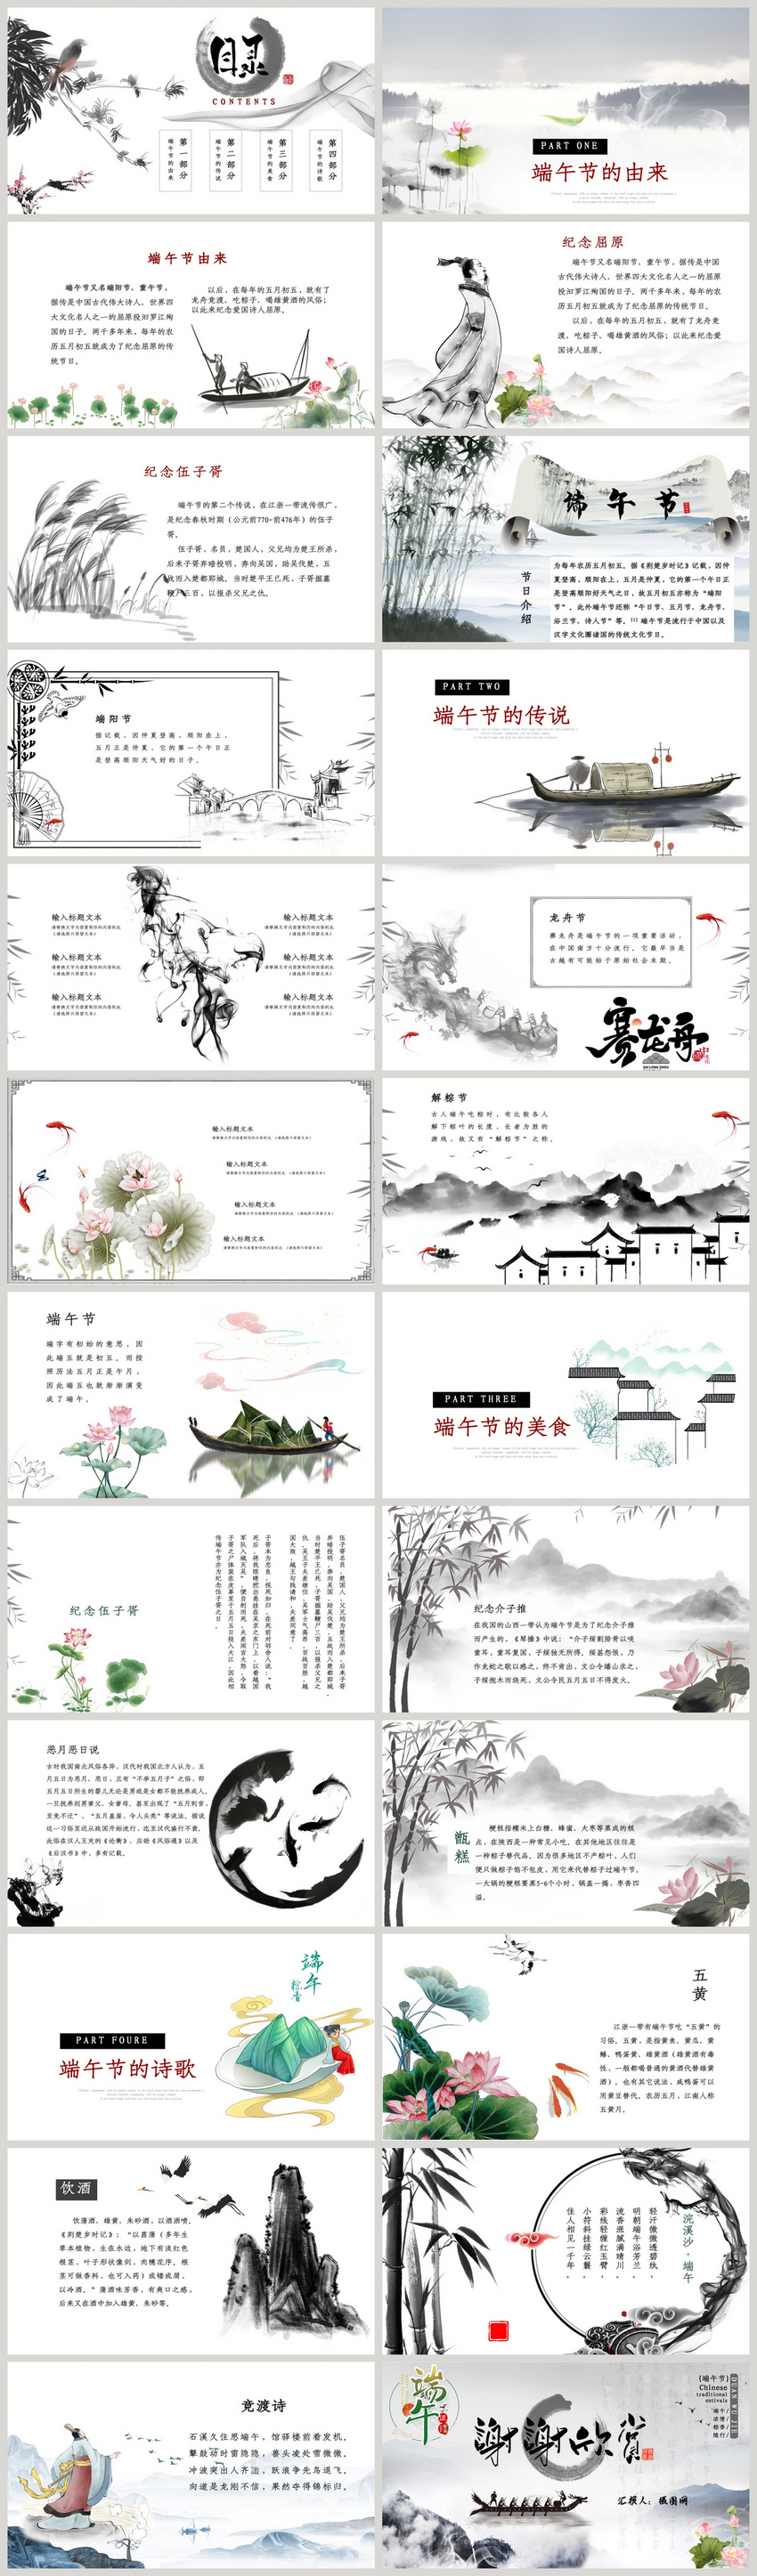 chinese dragon powerpoint template